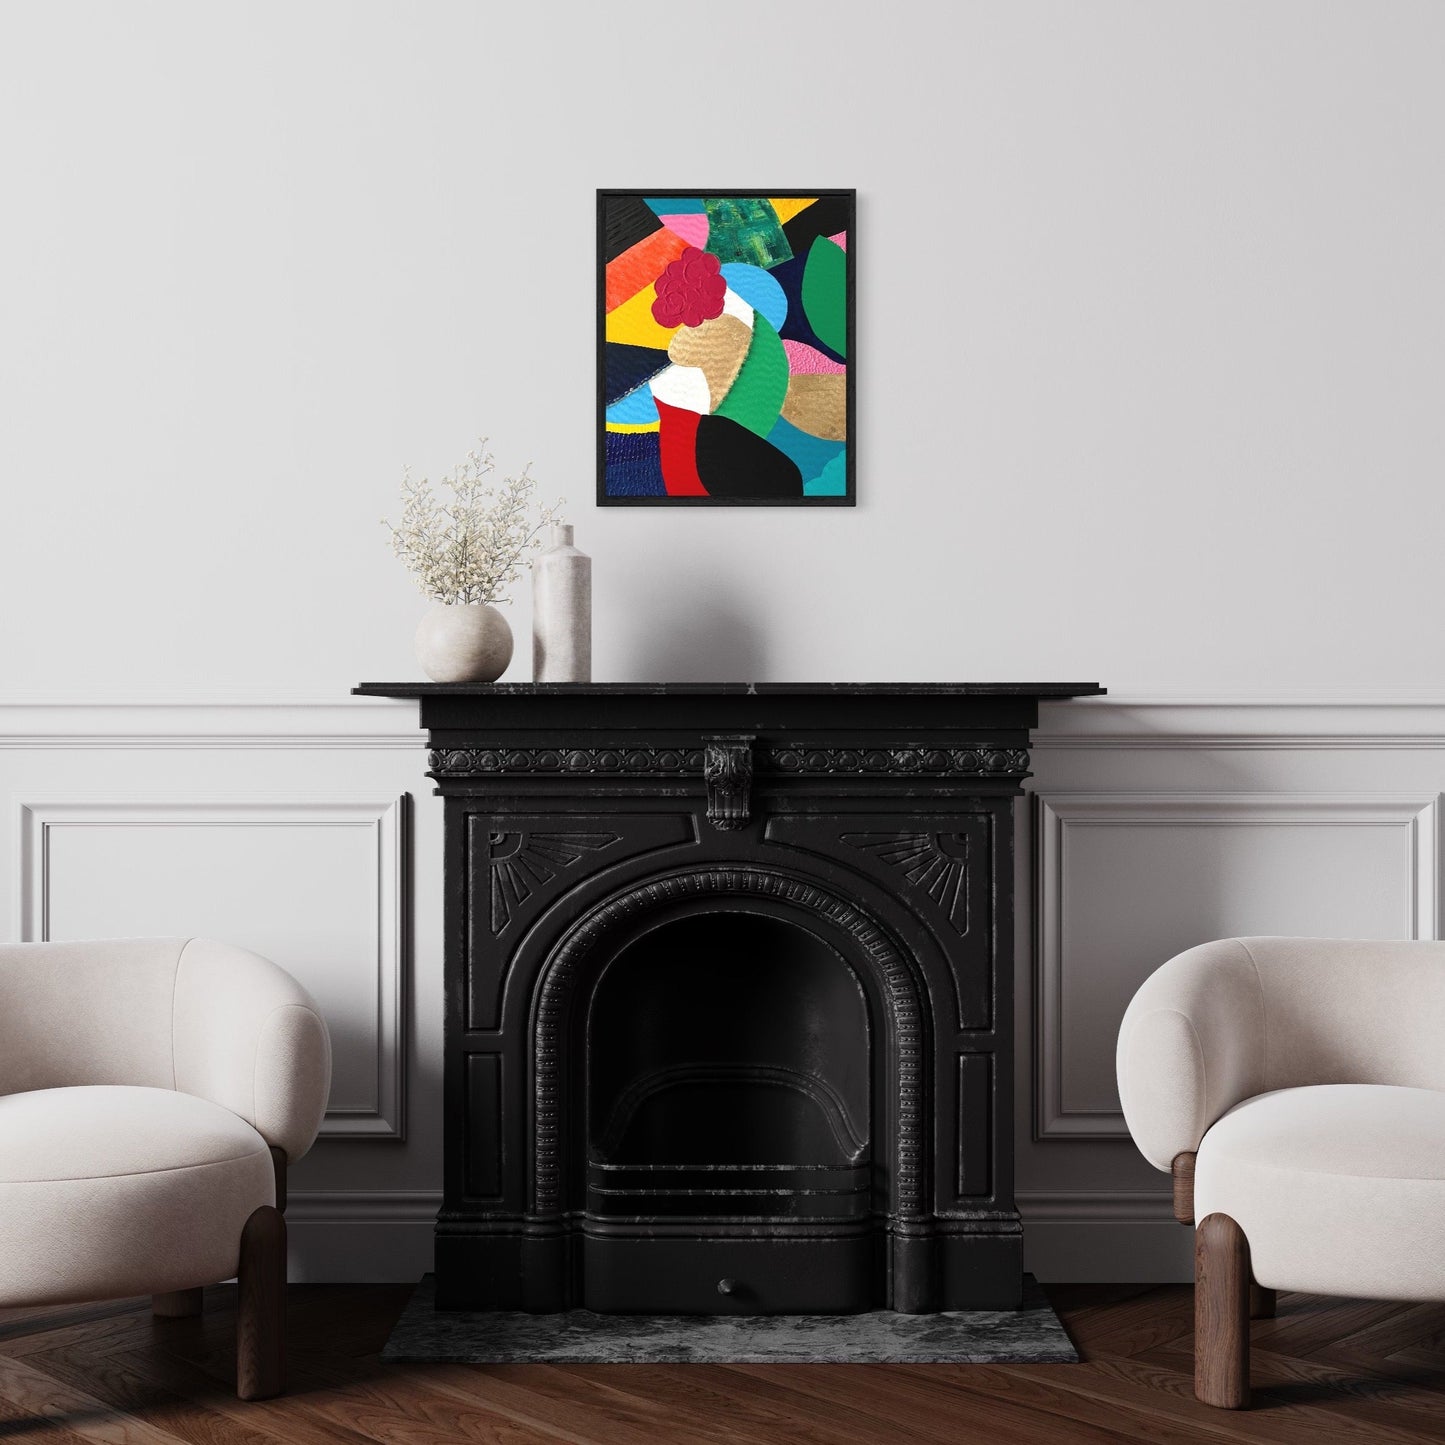 colourful contemporary art original painting infused with healing crystals